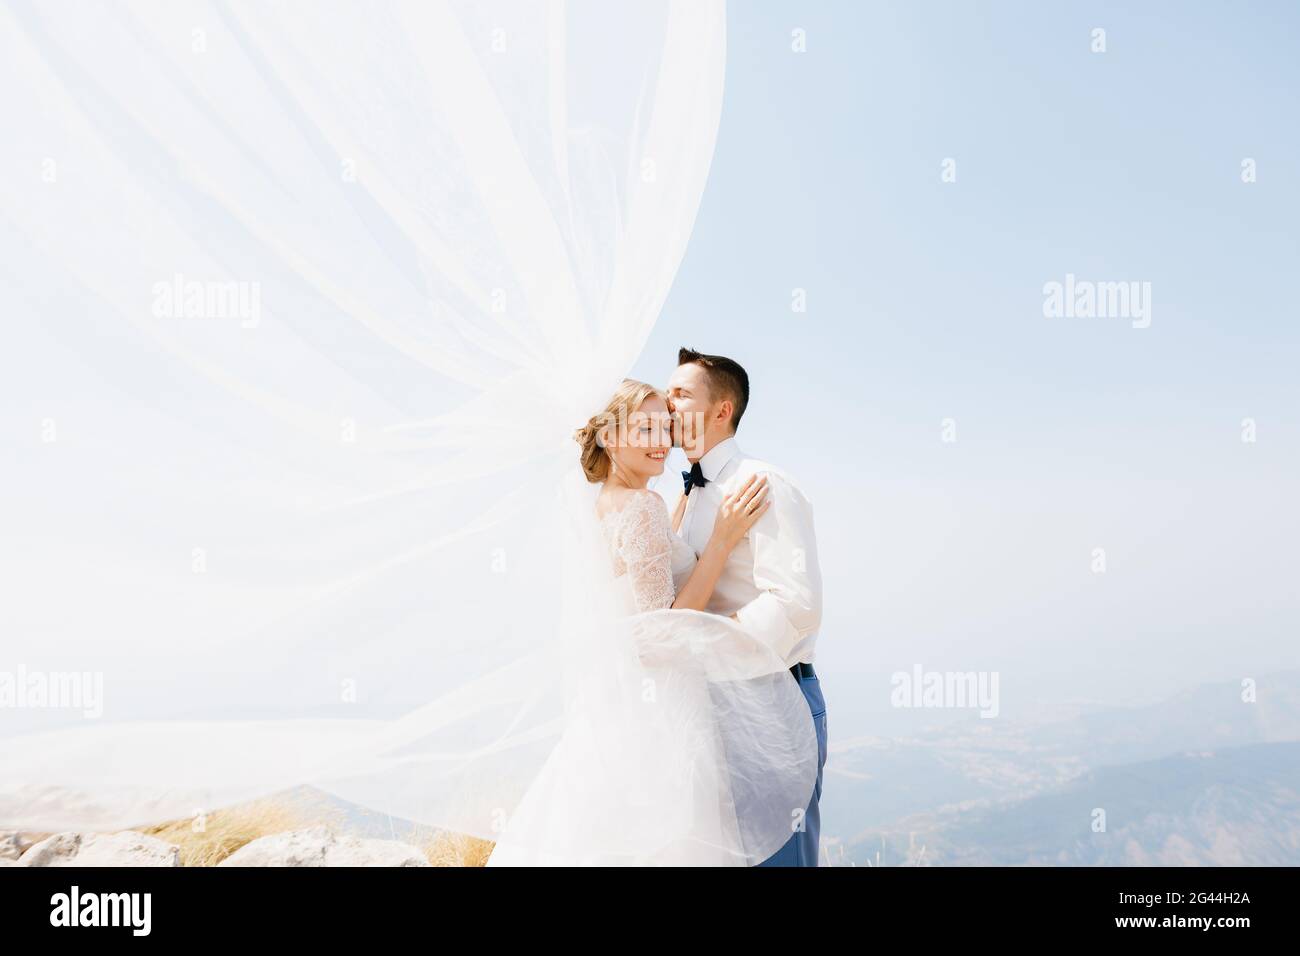 The bride and groom are embracing on the mountain, the groom kisses the bride, the wind waves the veil Stock Photo